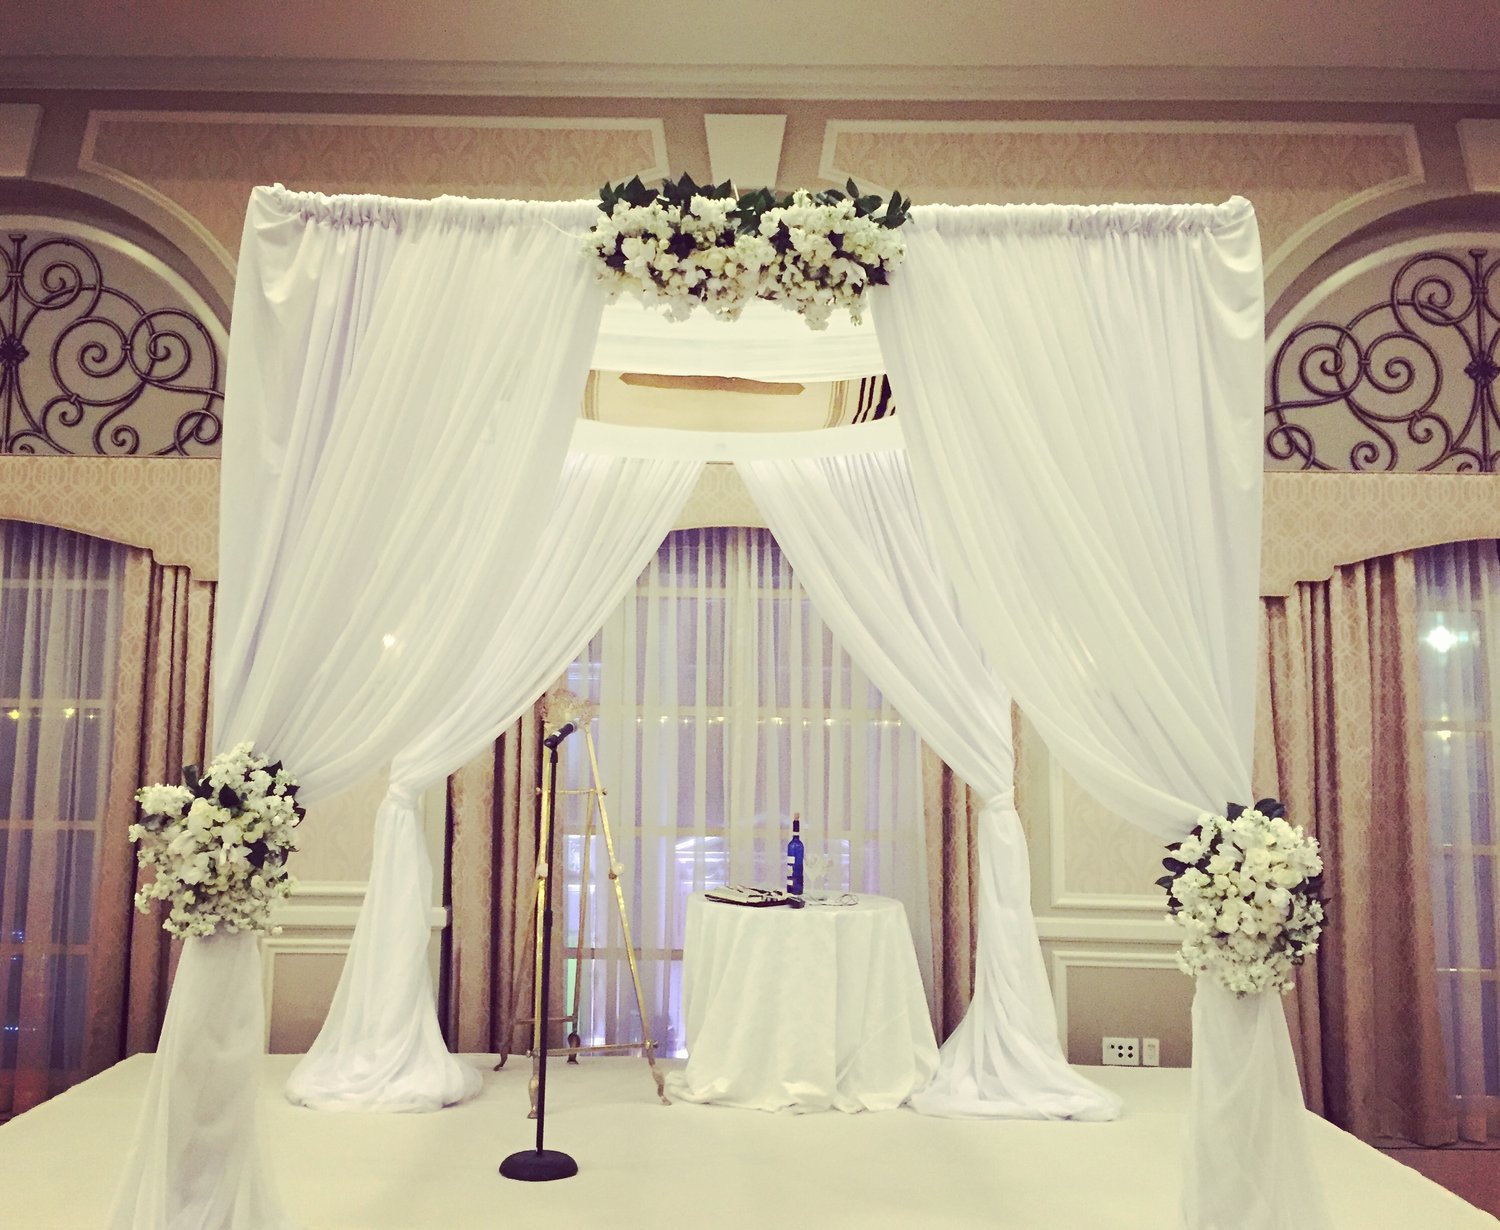  Winter wedding at the adolphus hotel in dallas, texas on december 17, 2016. Chuppah floral designed by designer, m. Rose 